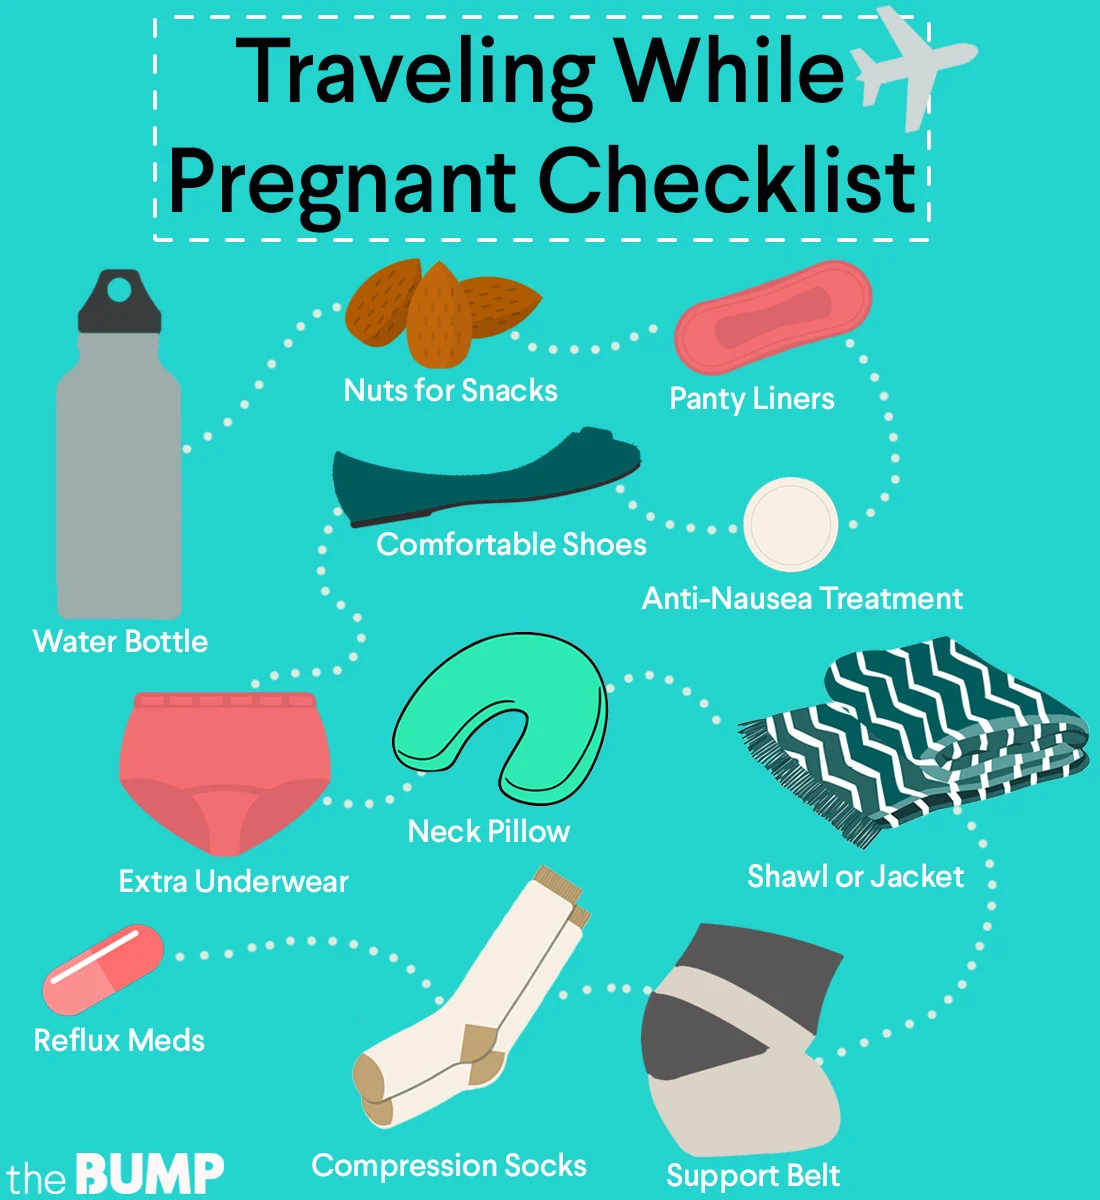 daily travel during pregnancy